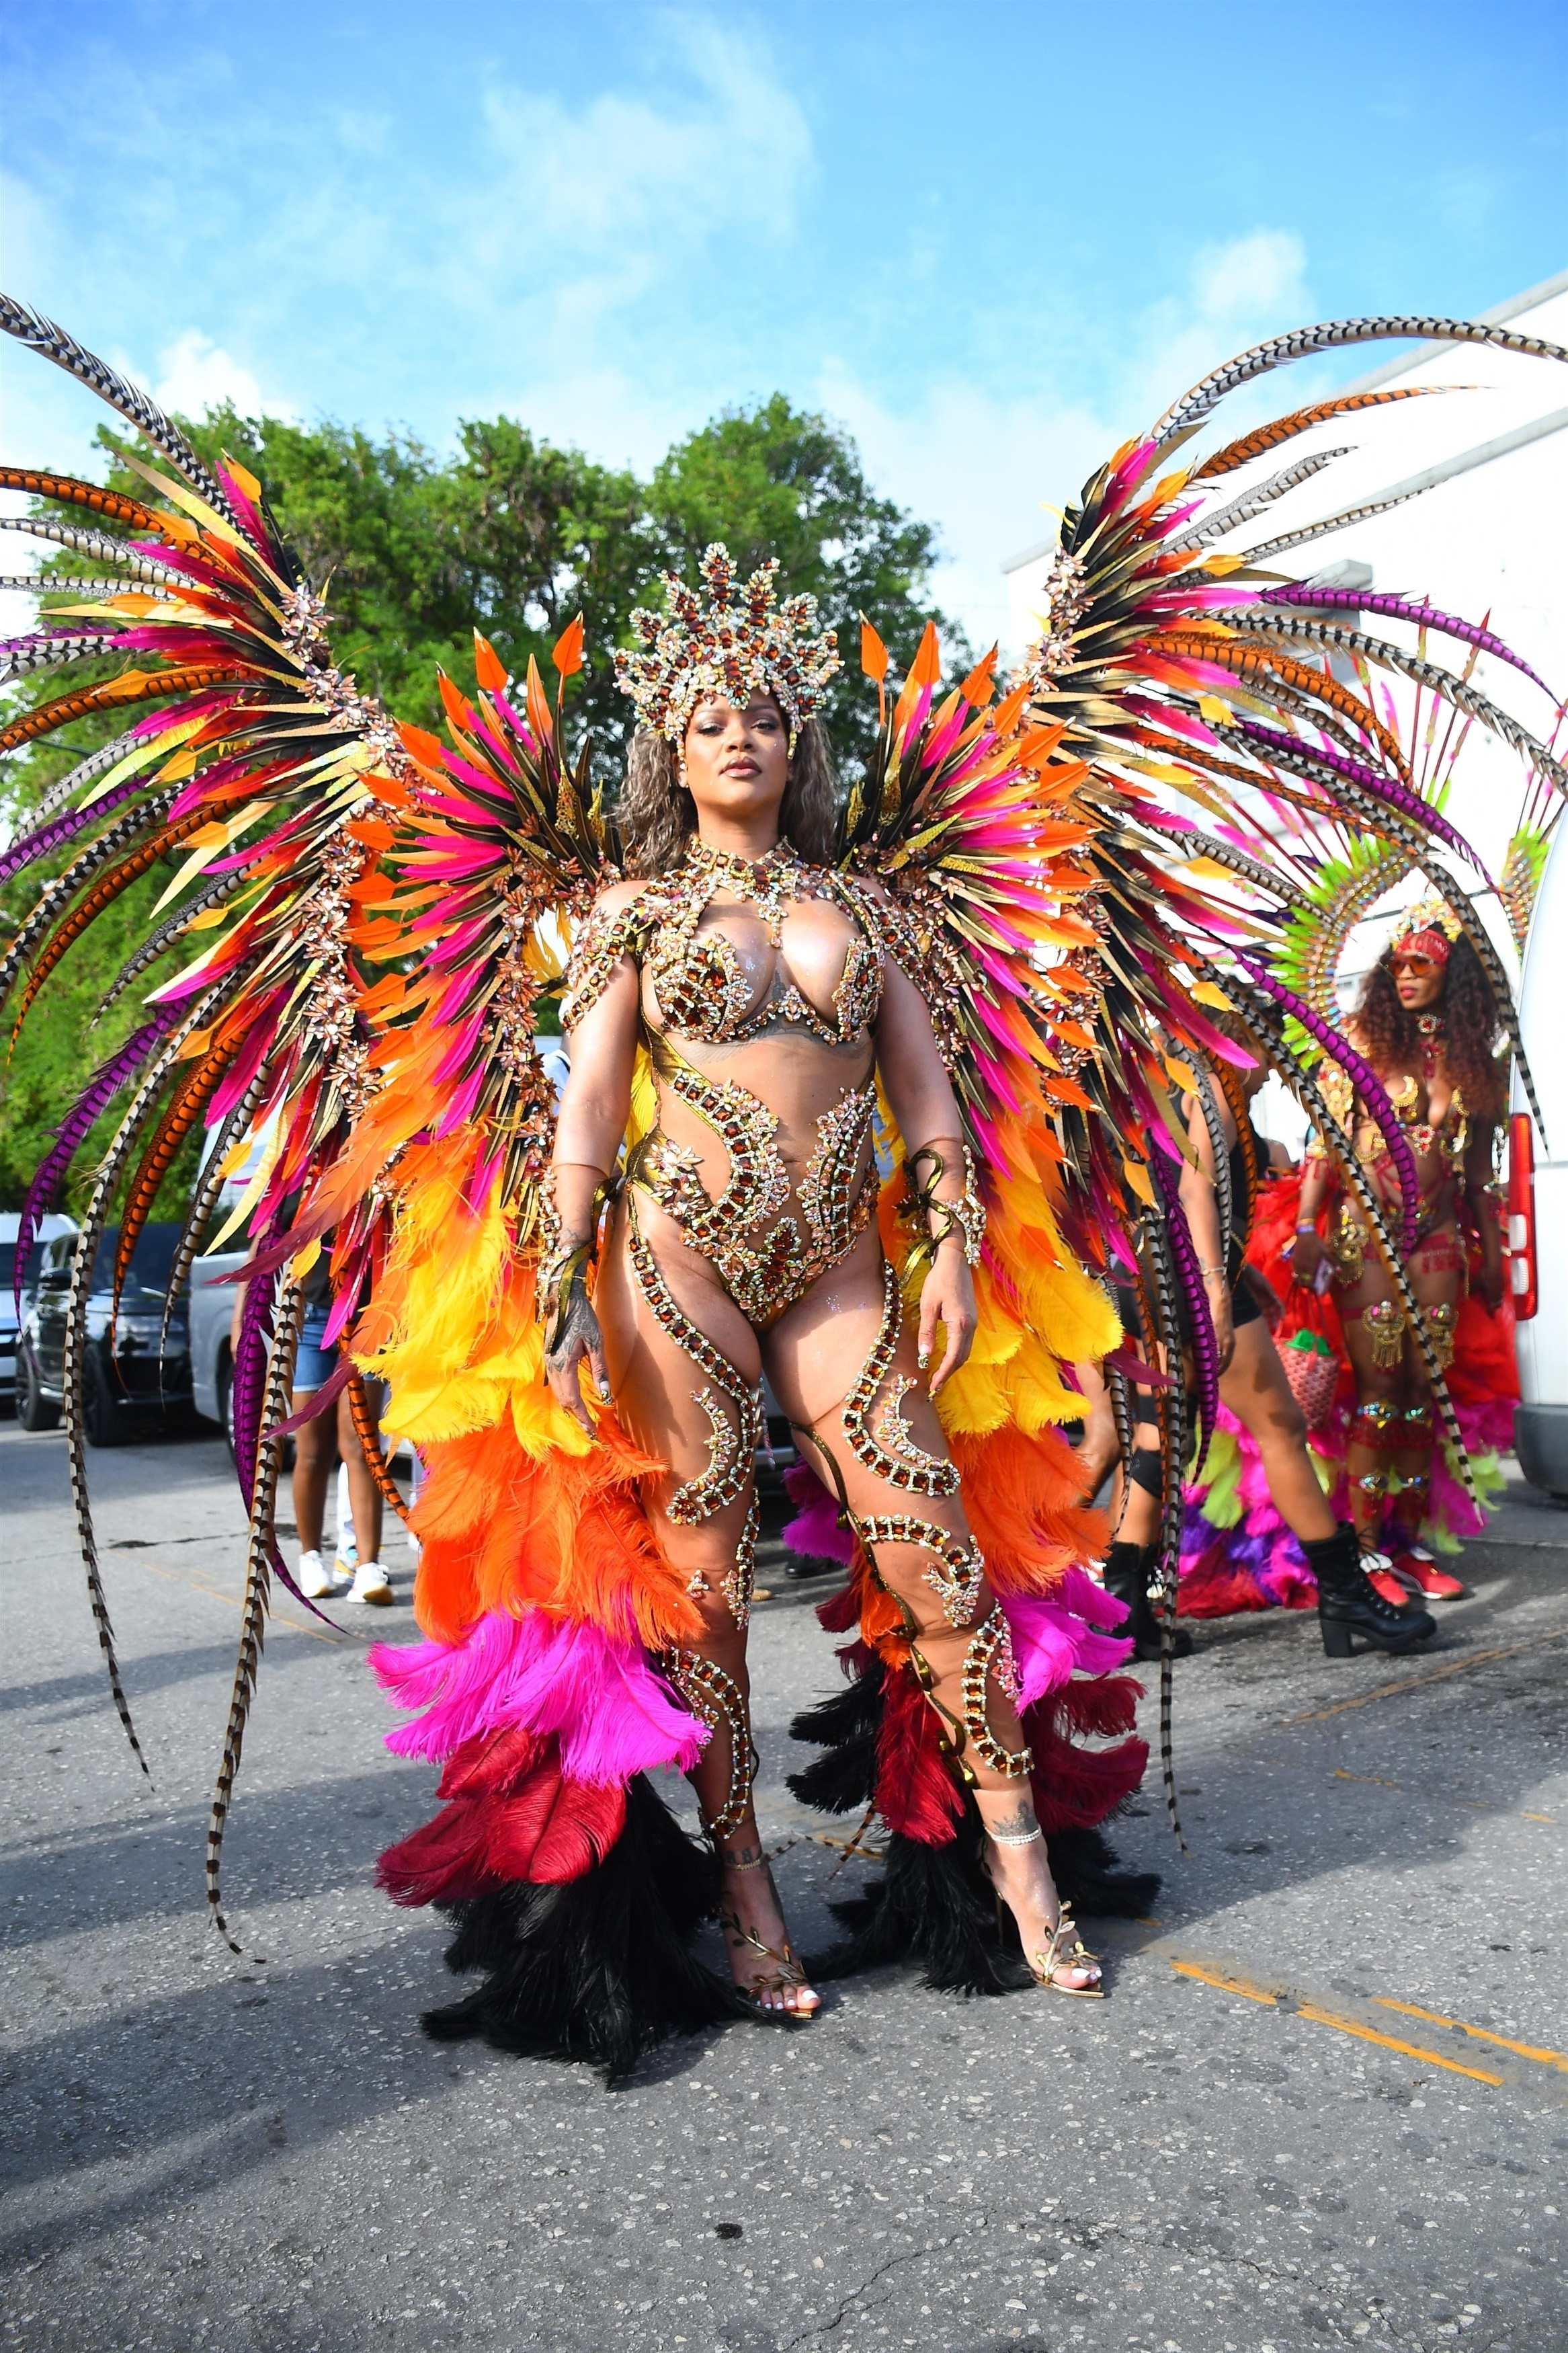 Rihanna returned to Carnival Festival in her native Barbados for the first time in many years